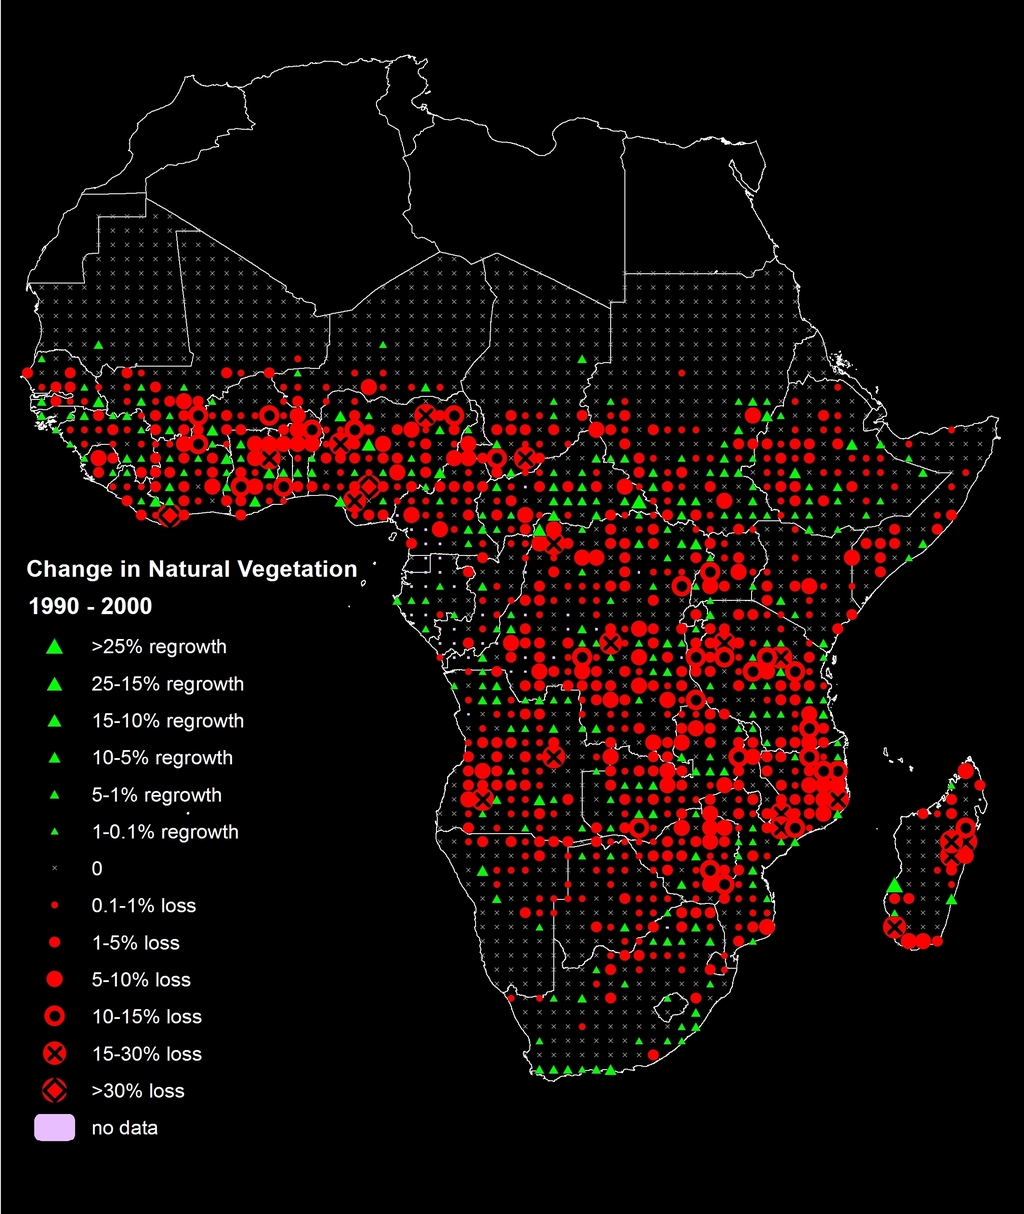 Change in natural vegetation in Africa between 1990 and 2000.